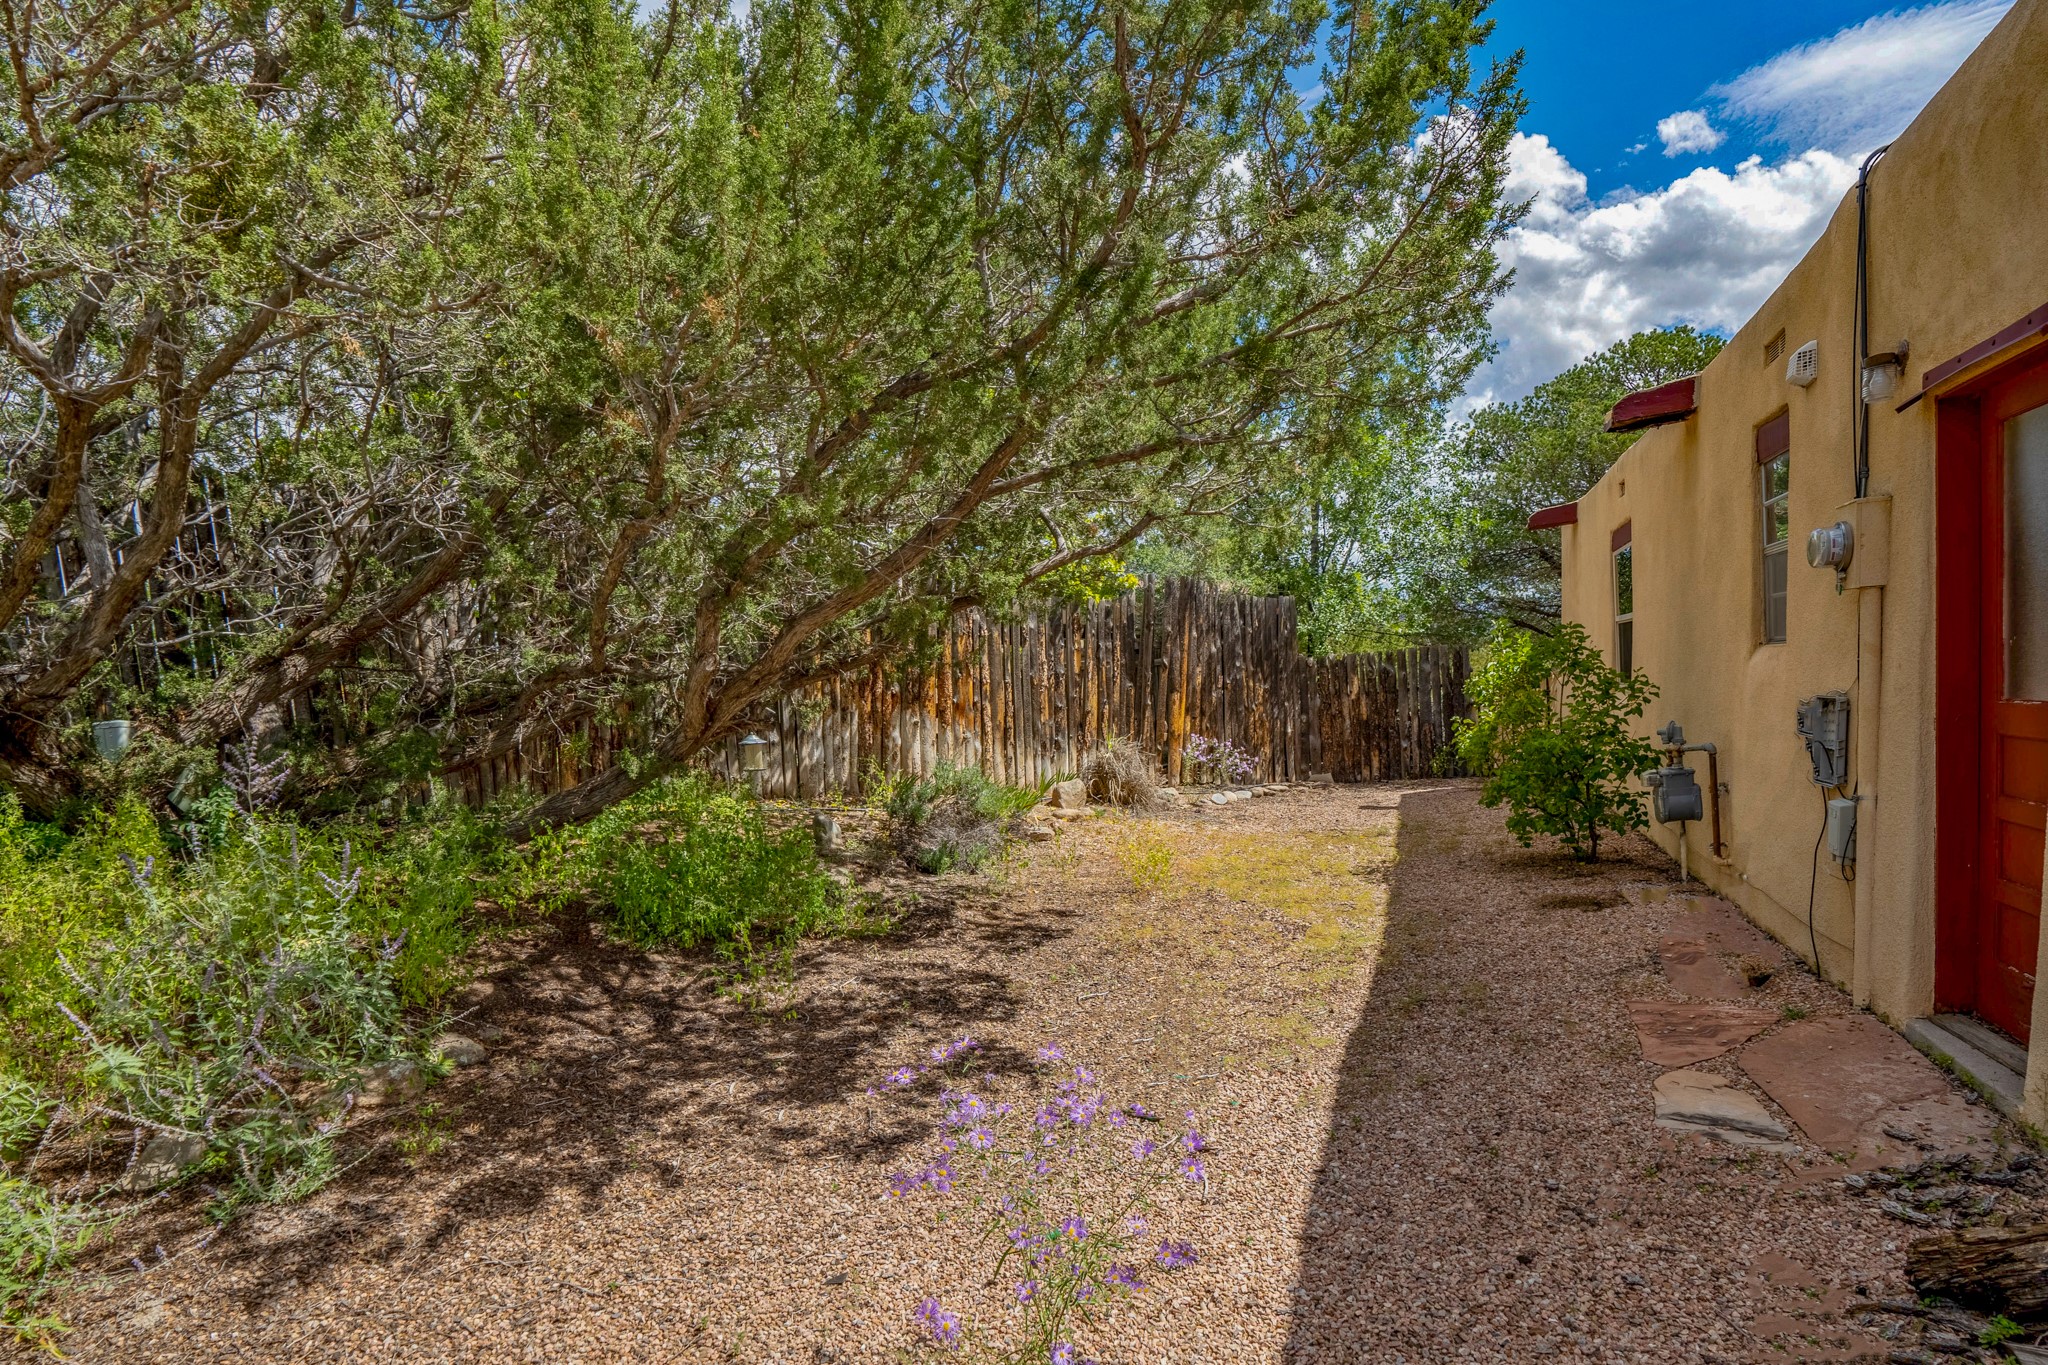 106 Michelle Drive, Santa Fe, New Mexico 87501, 3 Bedrooms Bedrooms, ,2 BathroomsBathrooms,Residential,For Sale,106 Michelle Drive,202232986